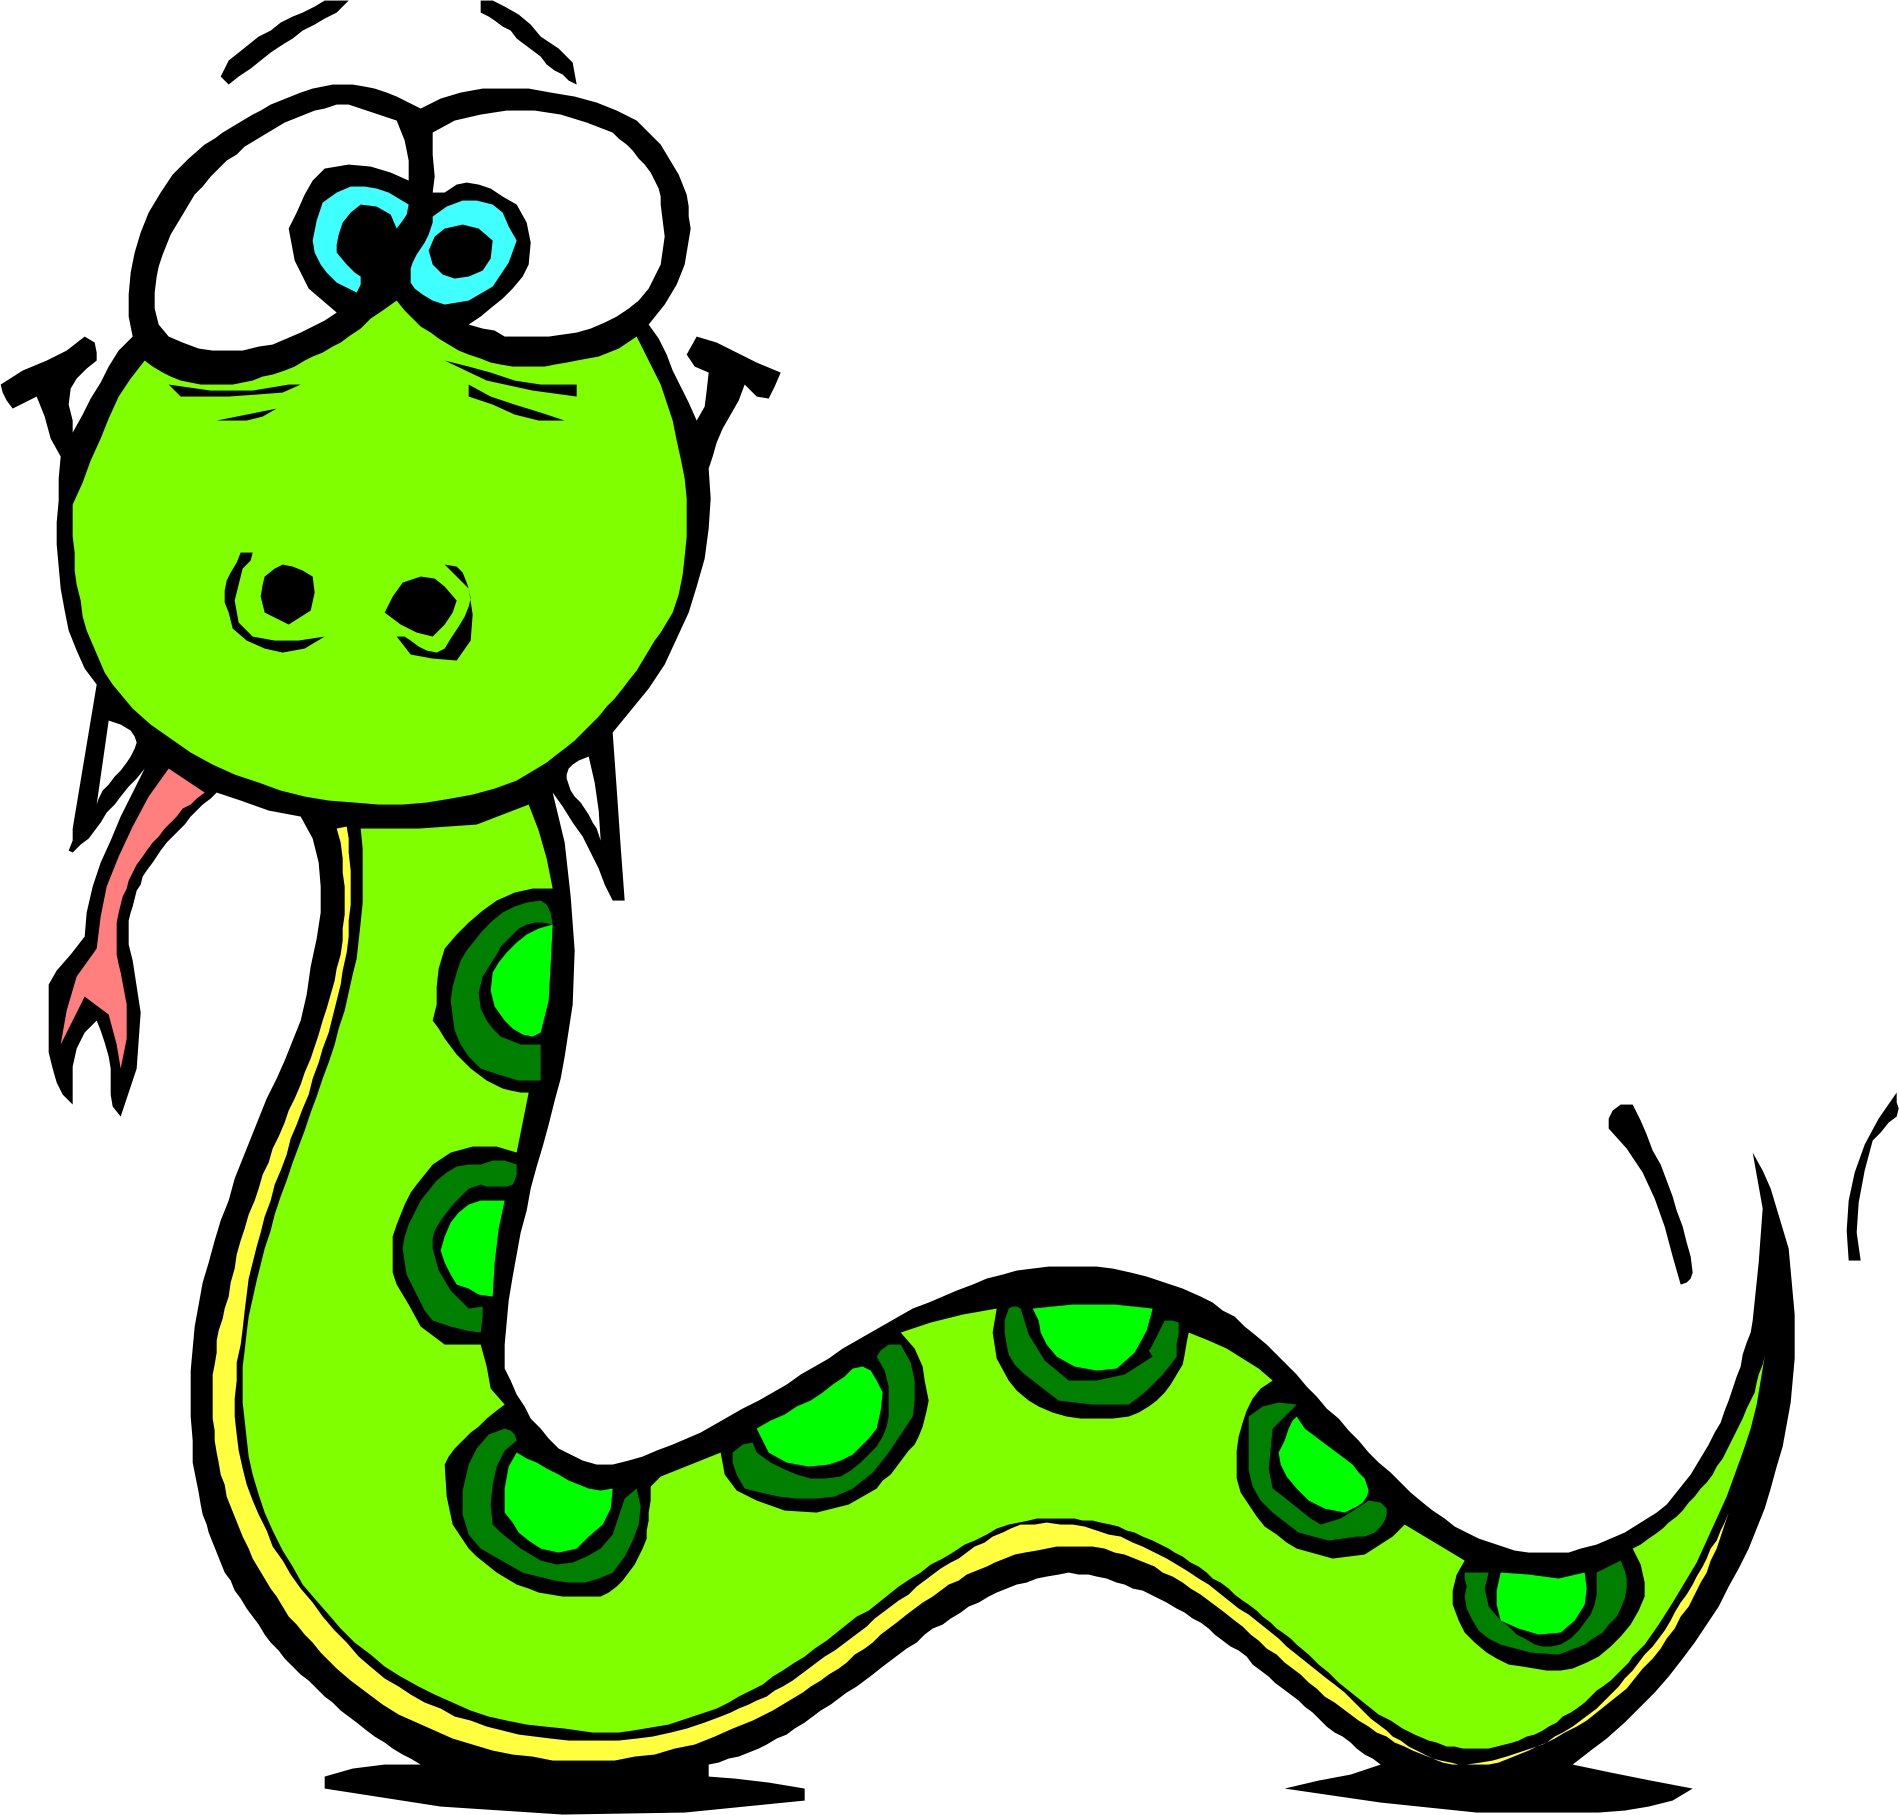 Cartoon Snake | Page 2 - Clipart library - Clipart library - Clip ...